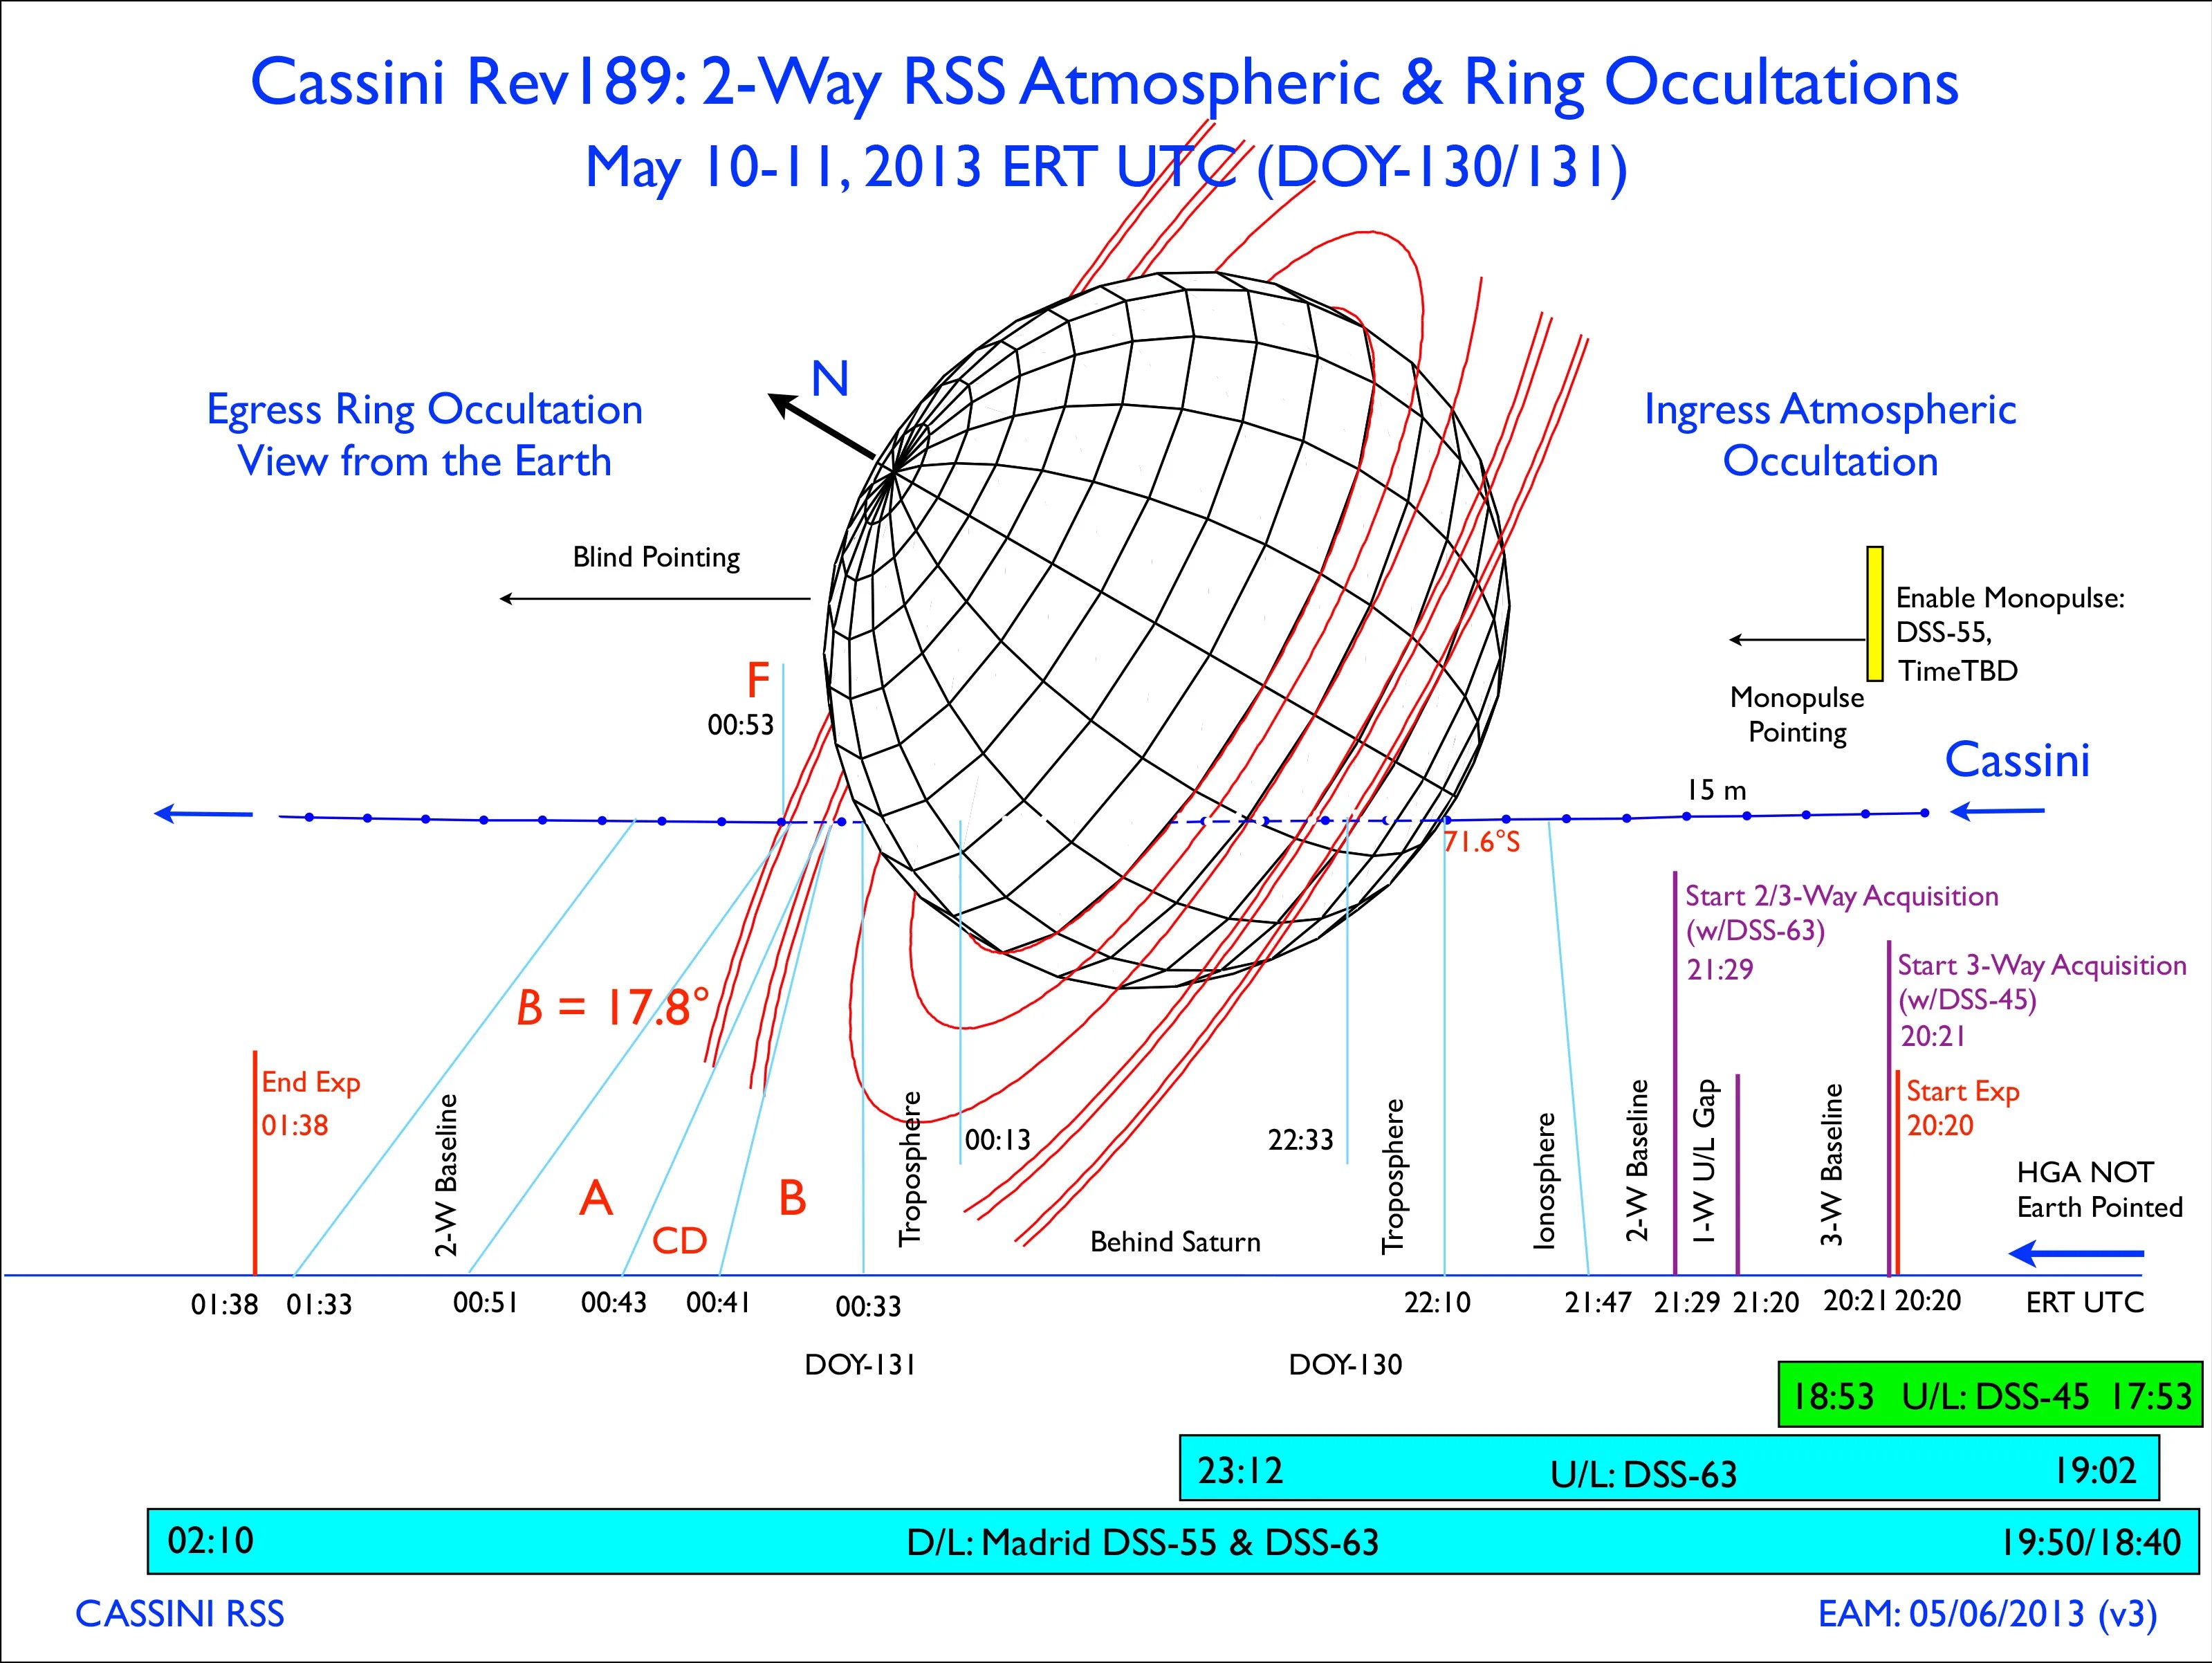 This graphic illustrates the view from Earth as Cassini was being occulted.